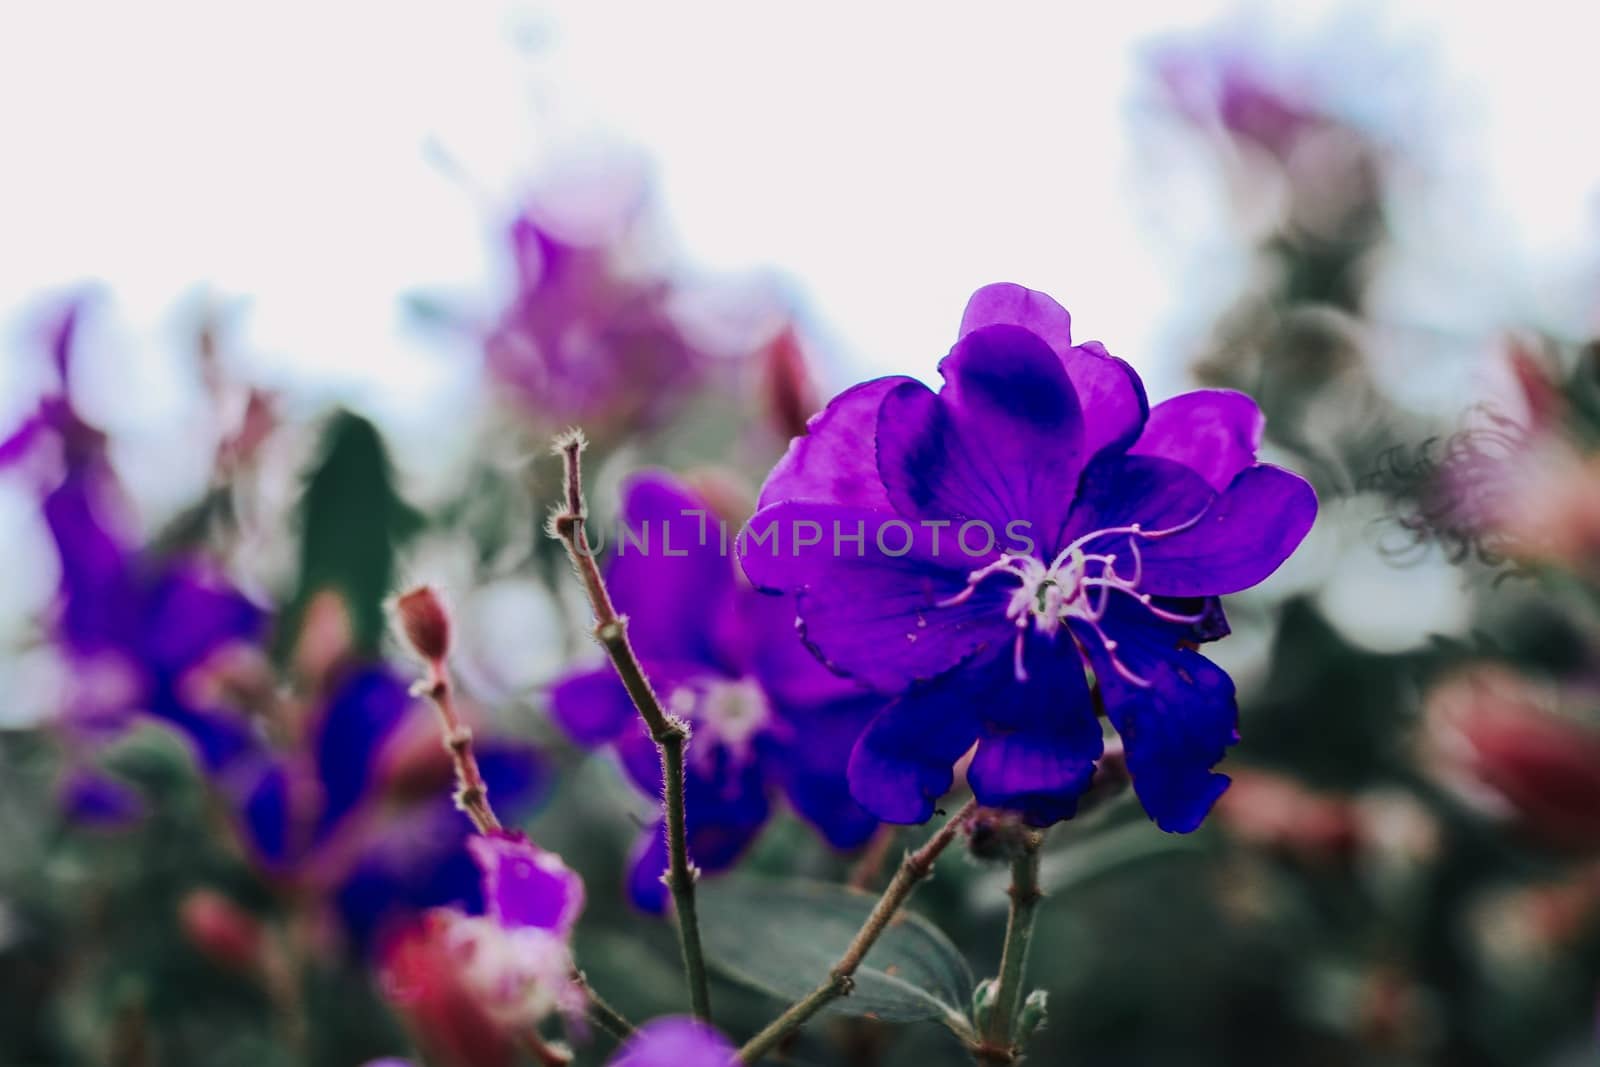 Winter flowers in the rainy season, Background blur by aekgasit